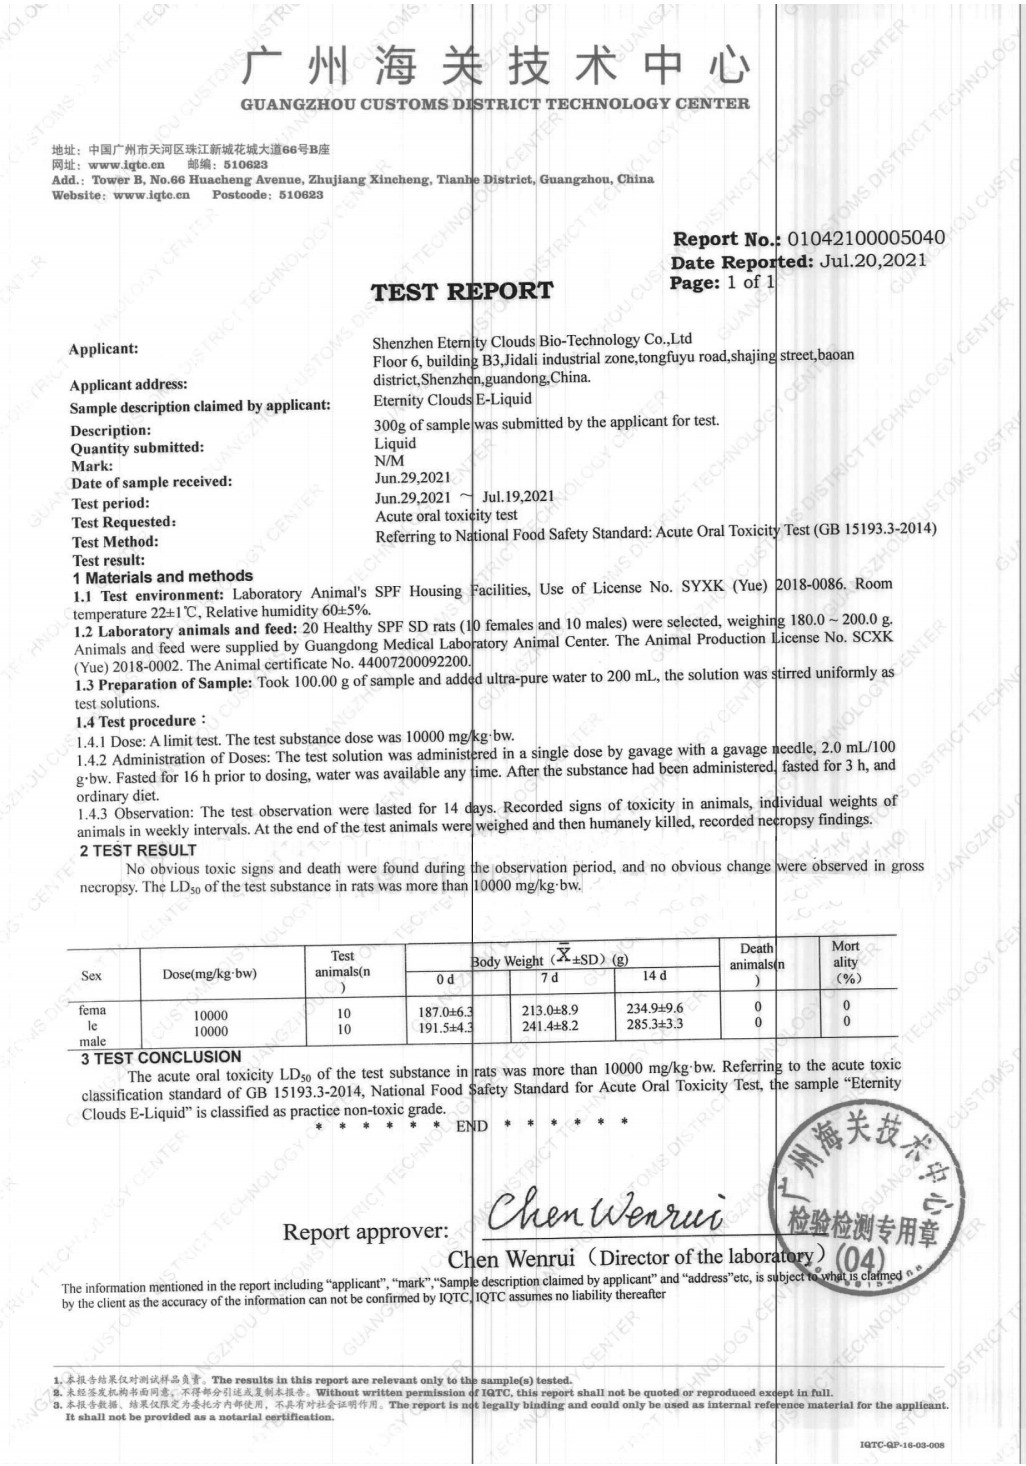 Acute Oral Toxicity Test Report